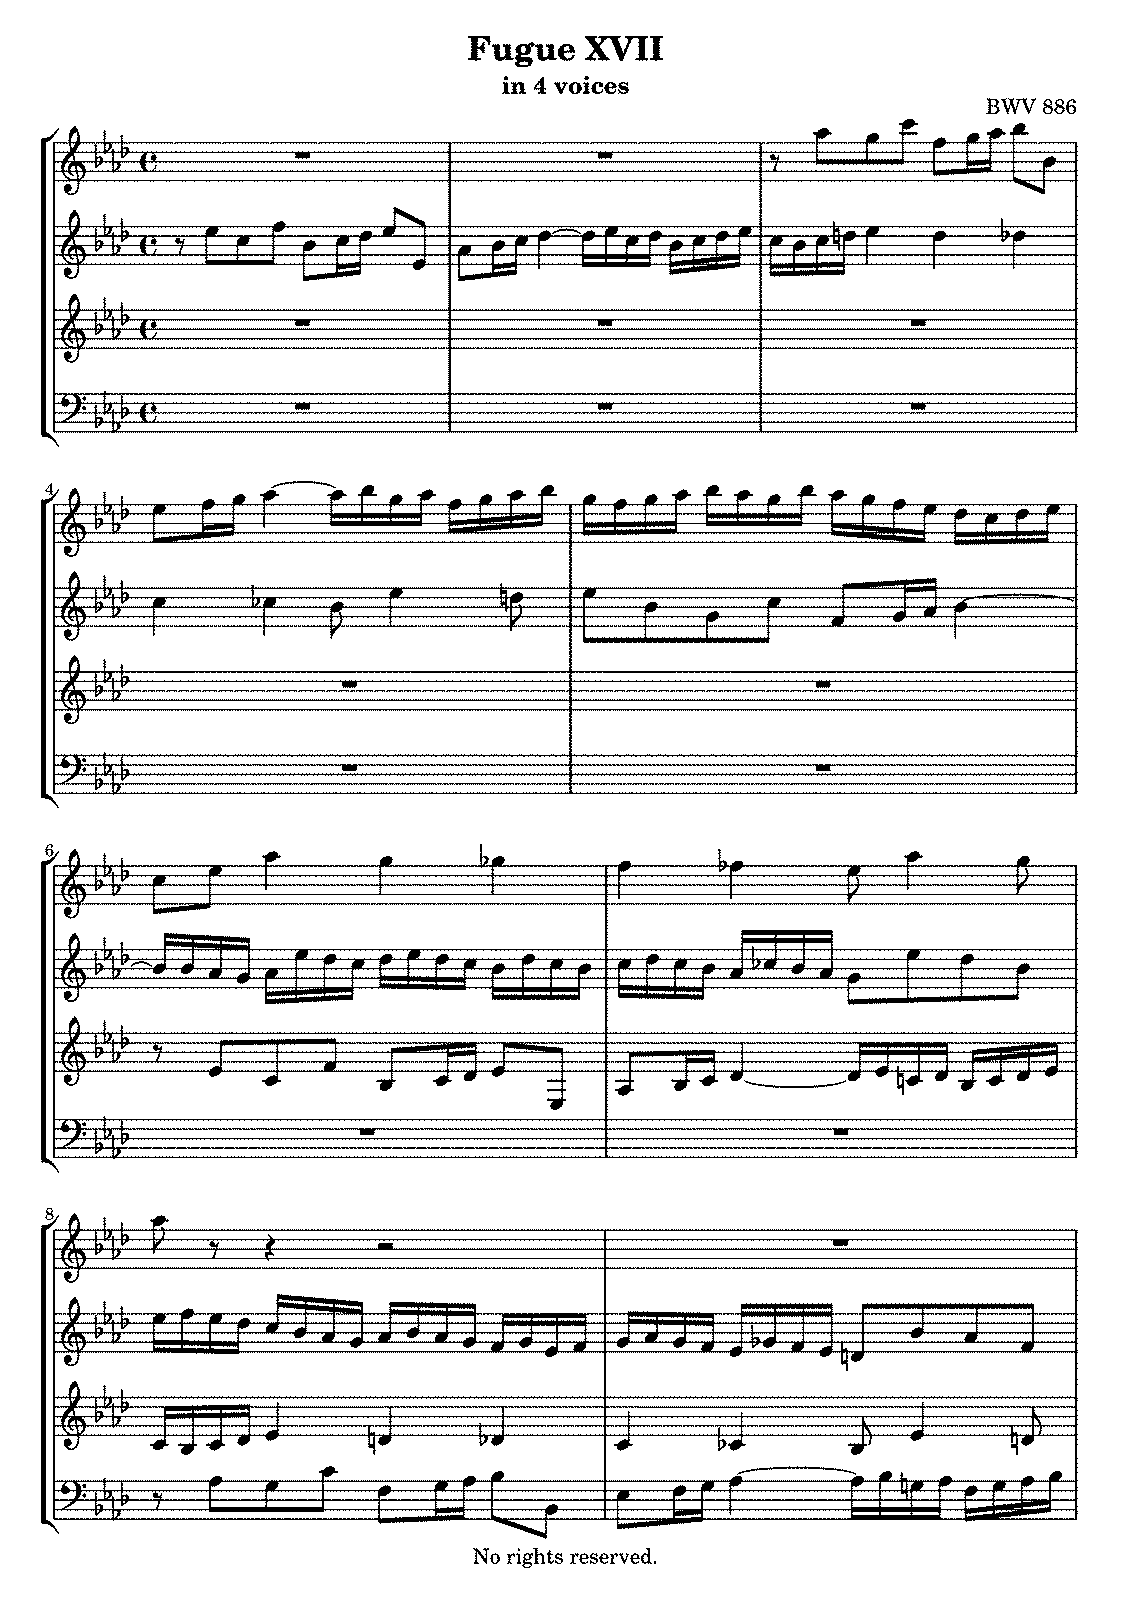 prelude and fugue in b flat major band pdf